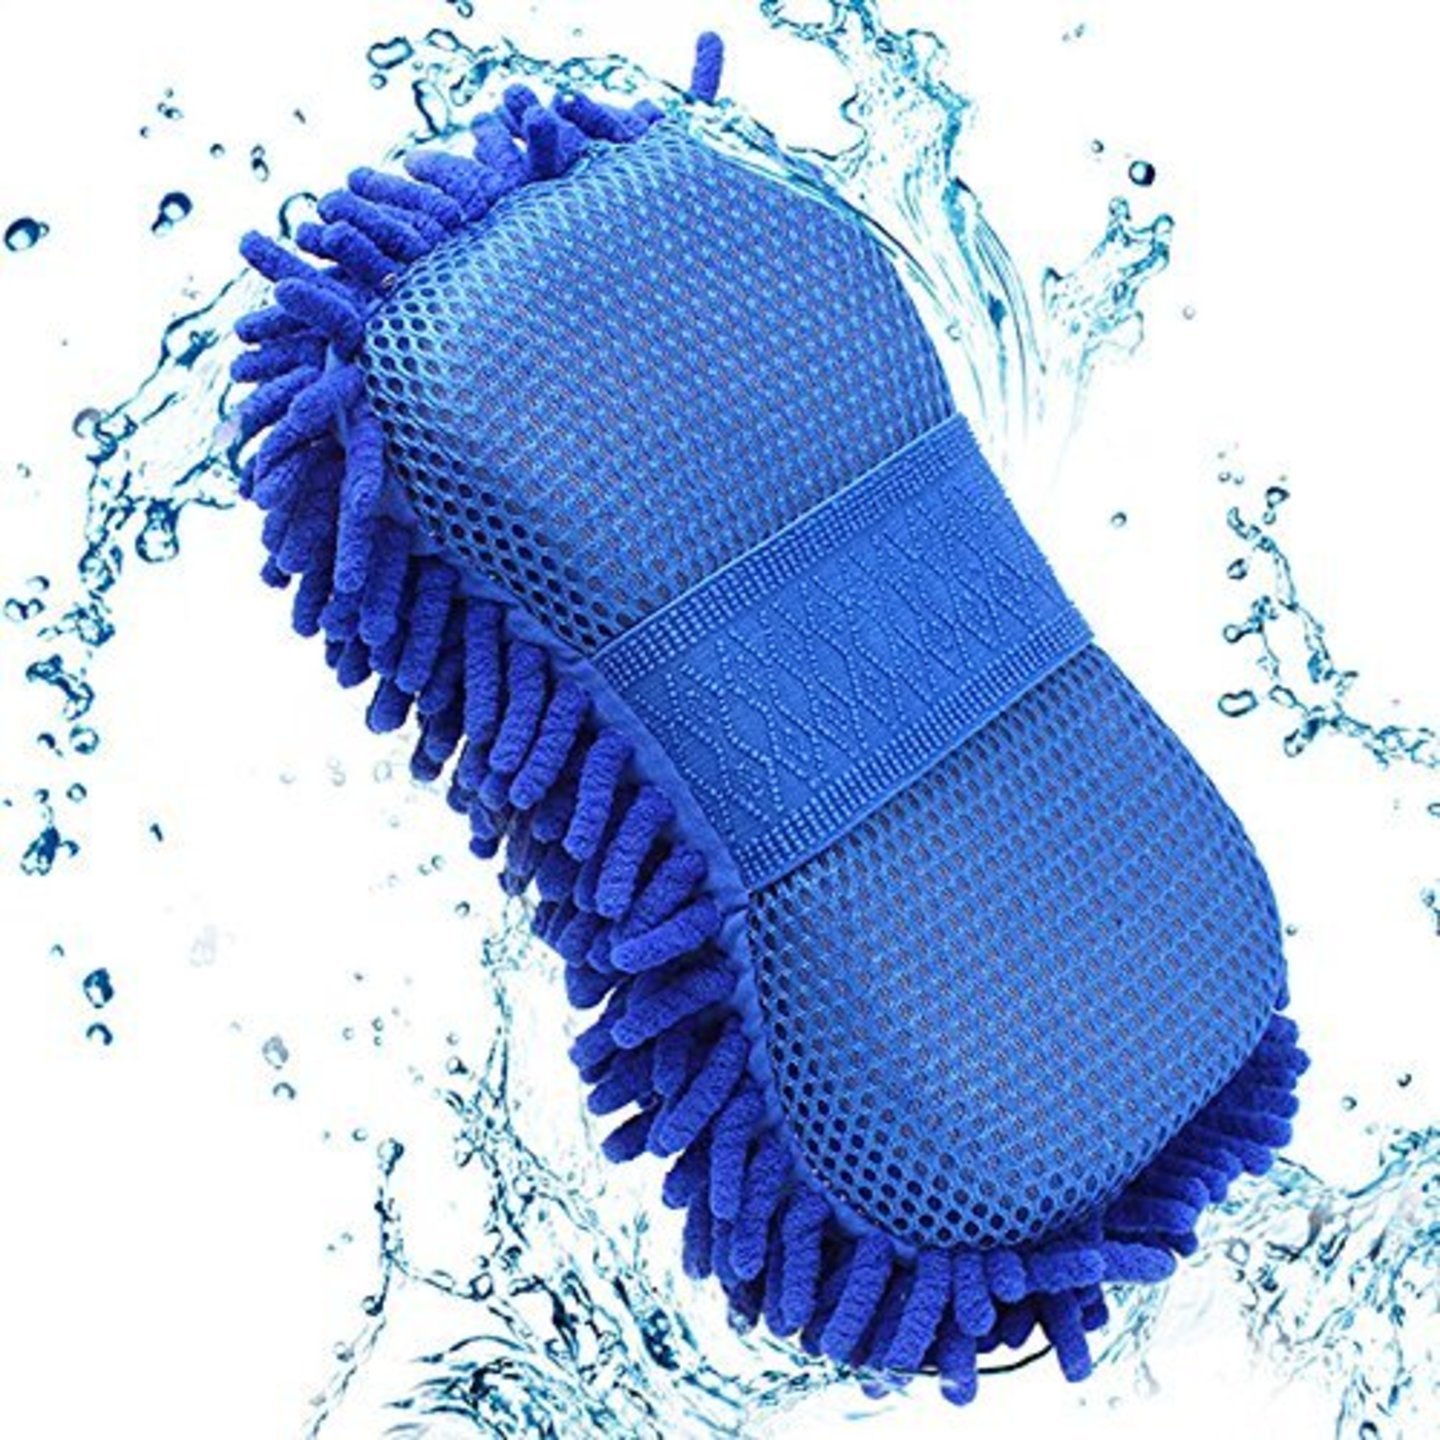 JonPrix Wash and Dry 2-in-1 Multipurpose Microfibre Cleaning Sponge,Car Duster